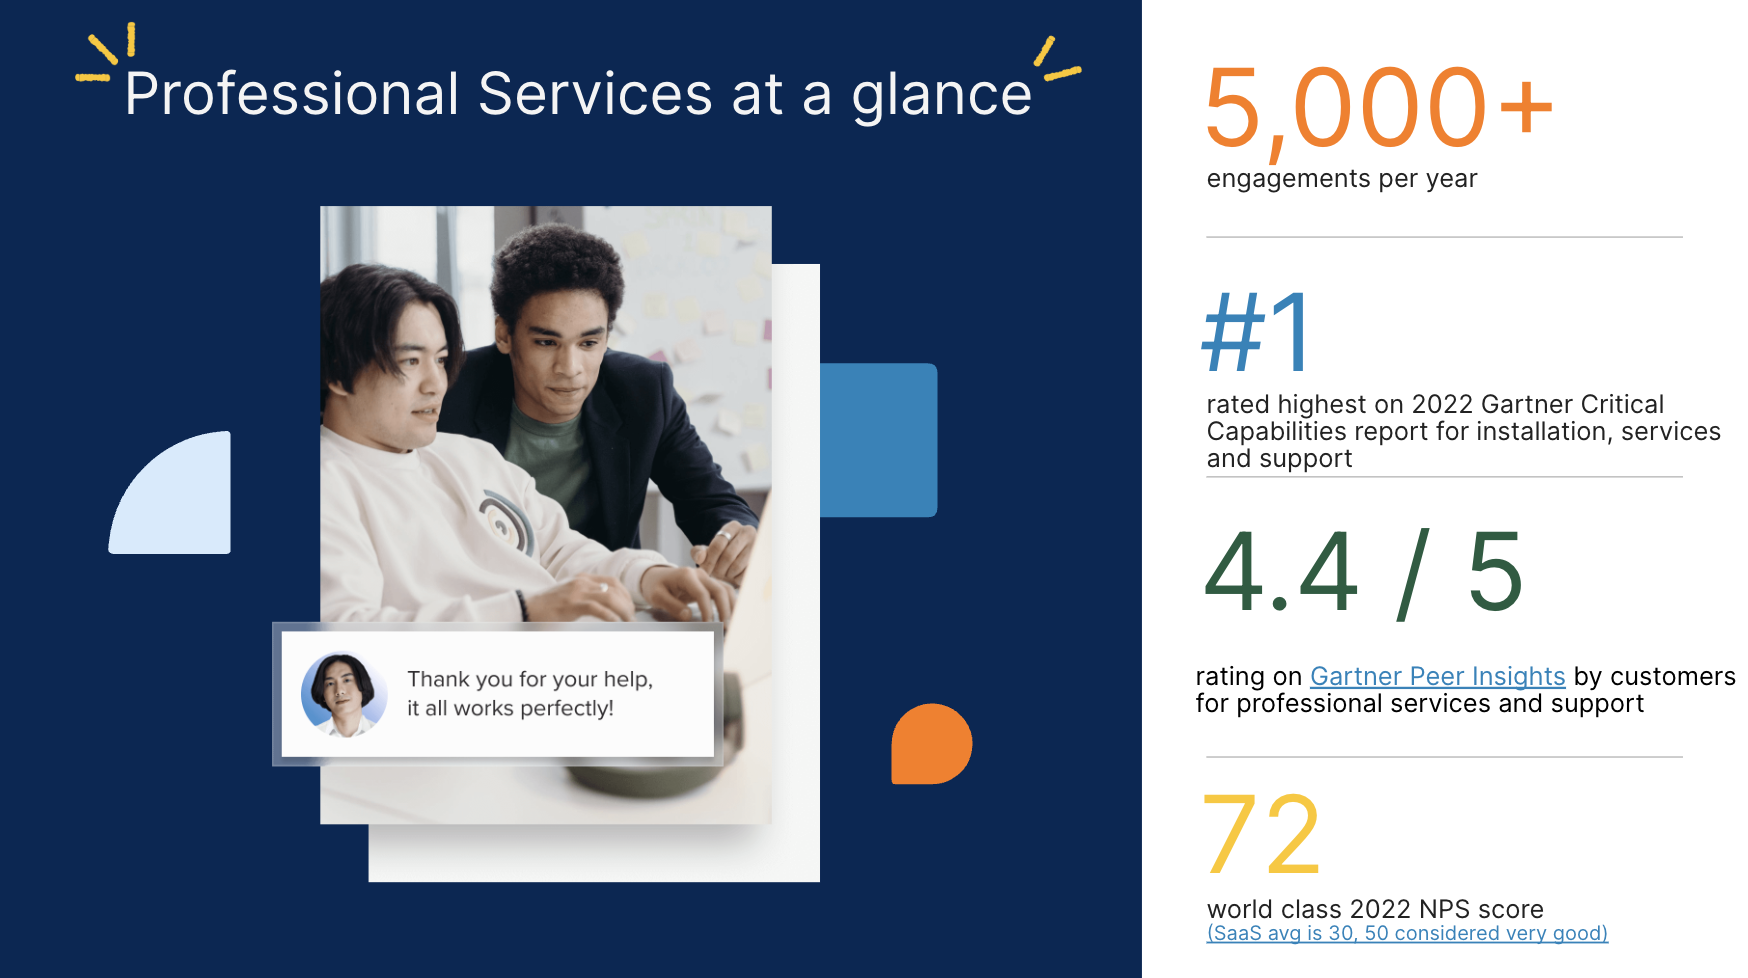 RingCentral Professional Services stats